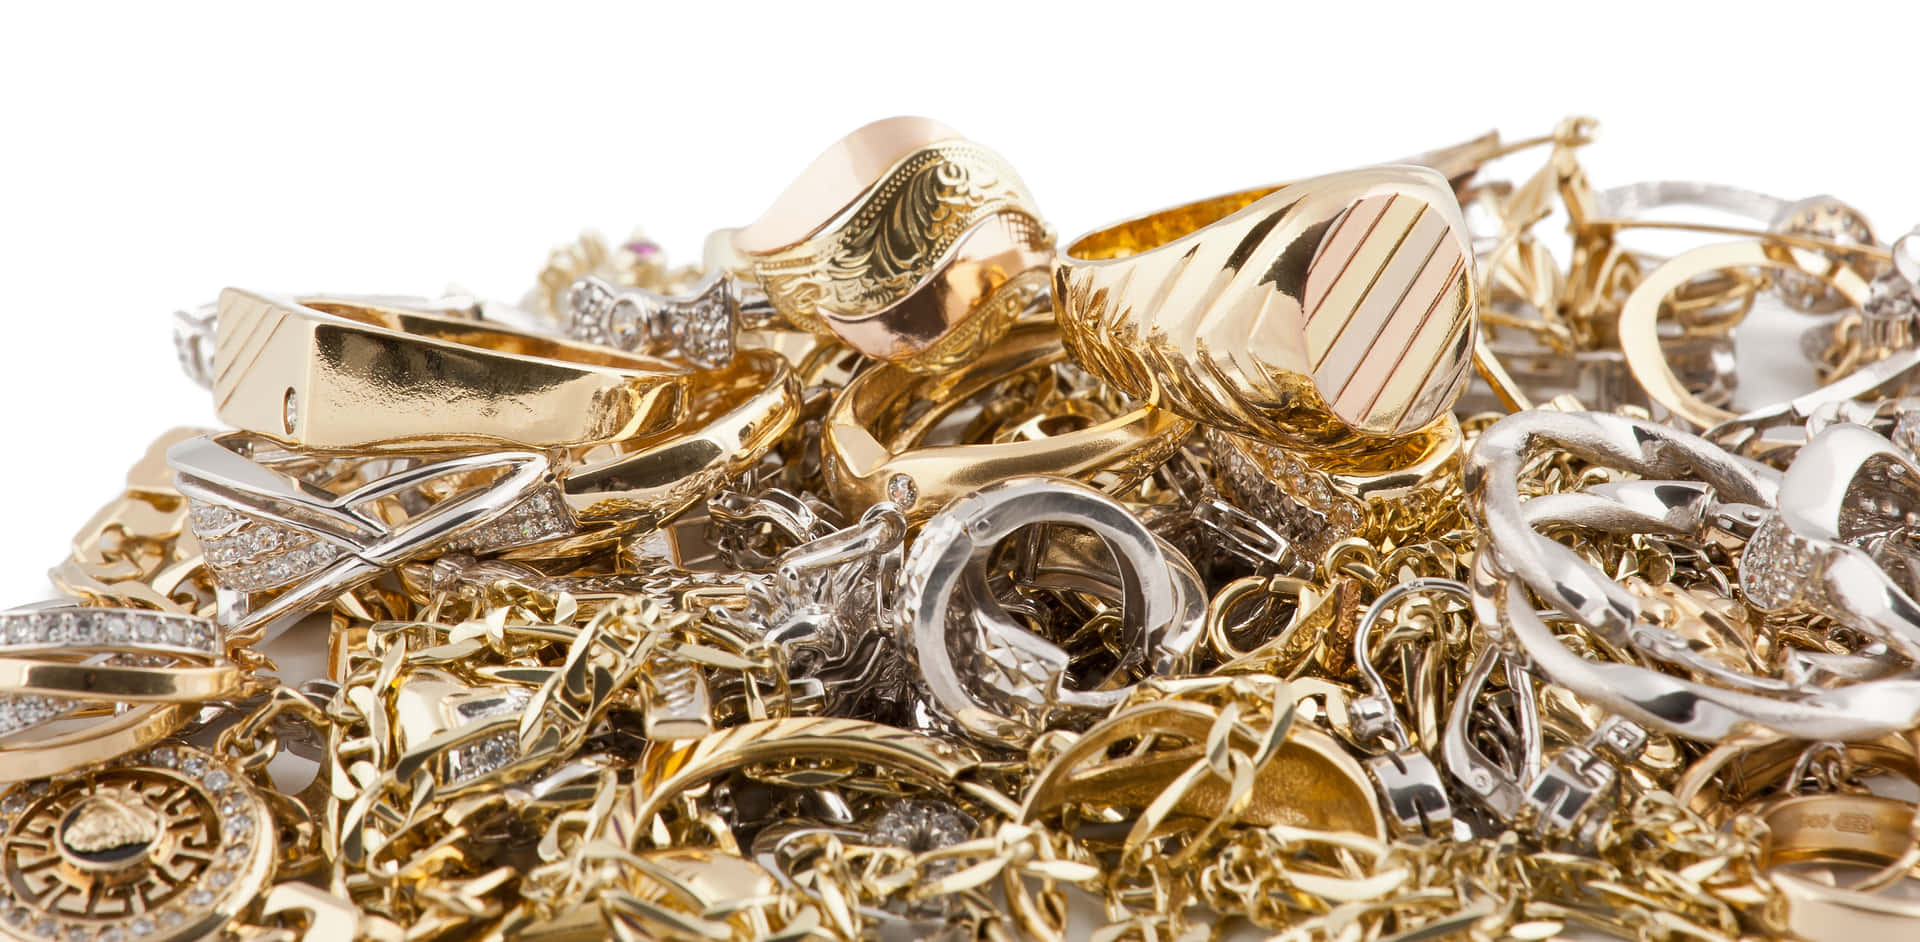 A Pile Of Gold And Silver Jewelry